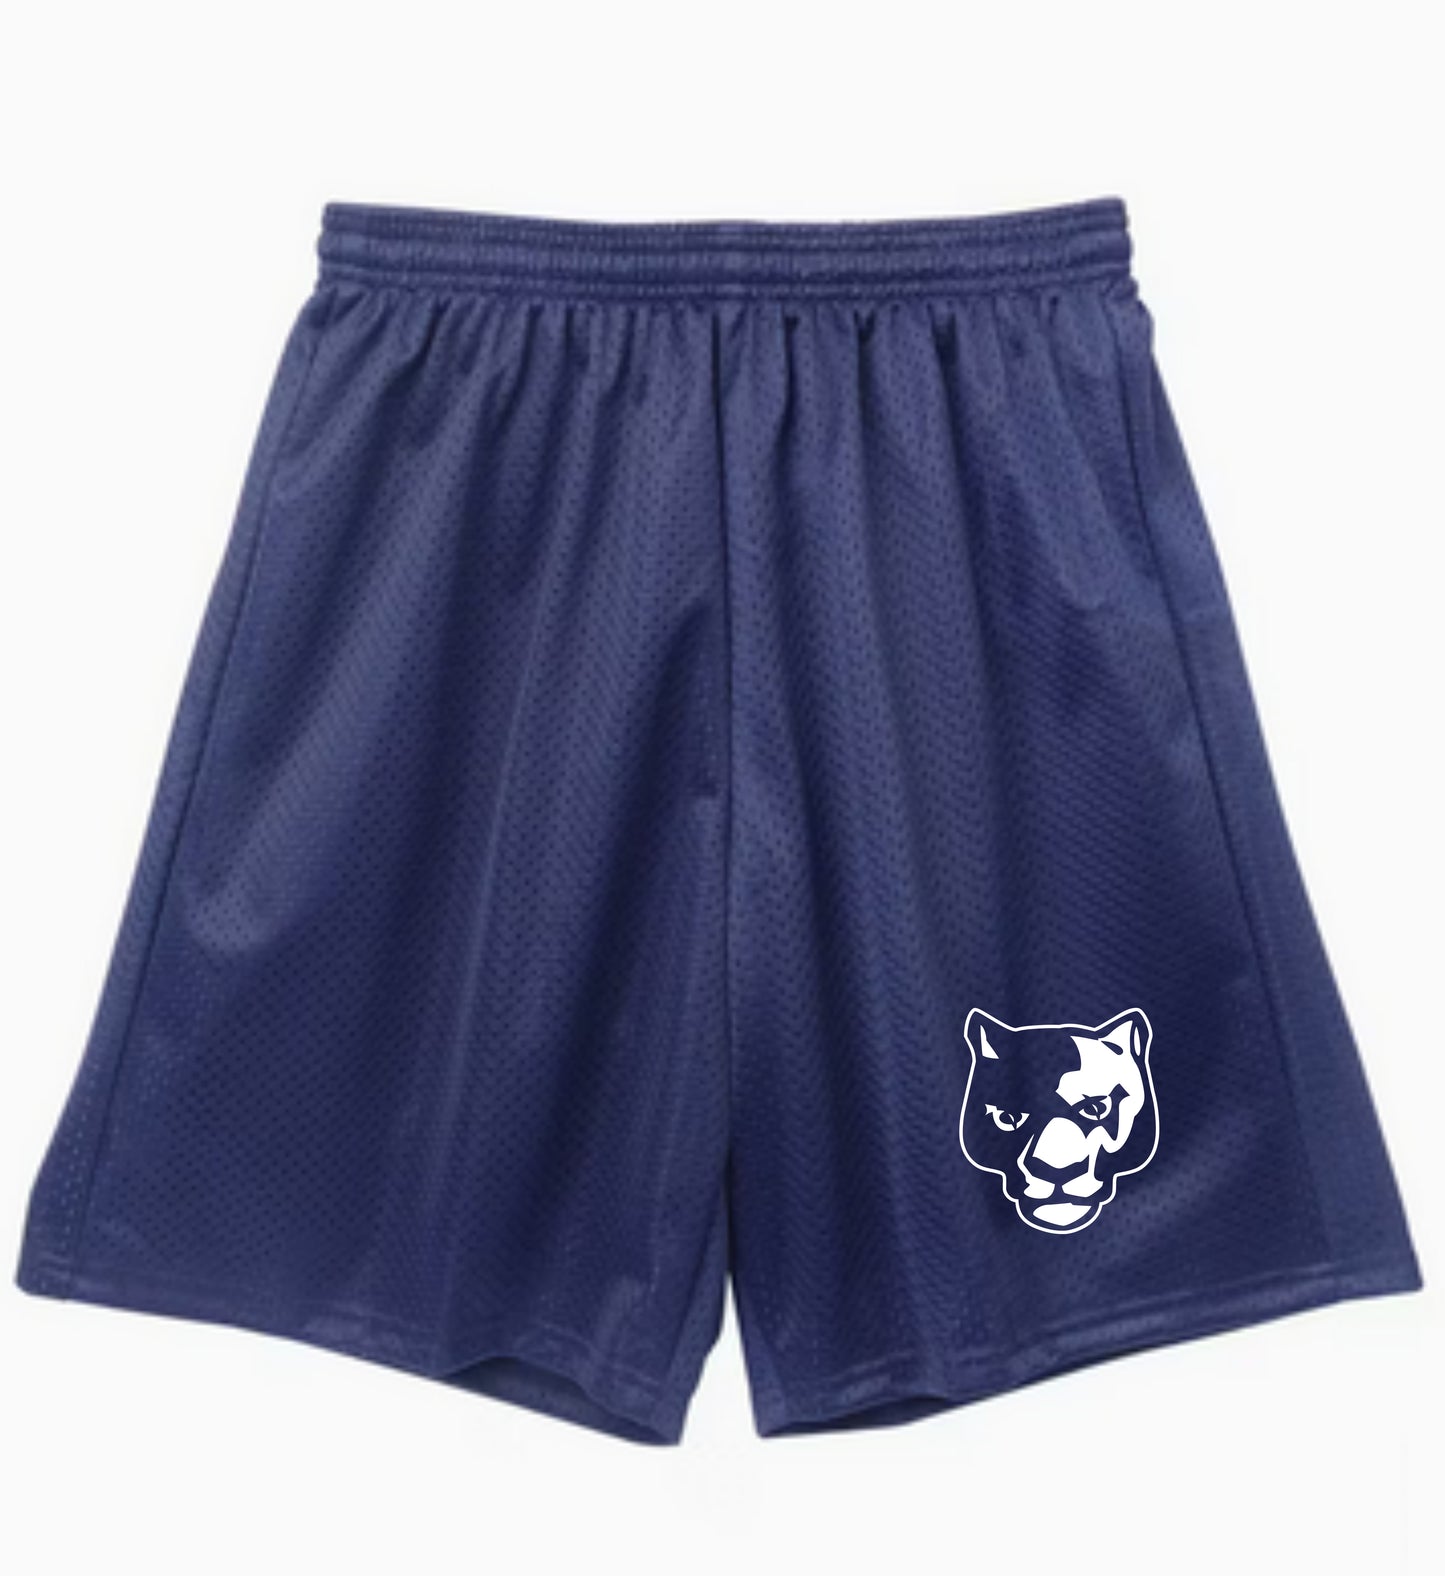 Panther Head - Adult 7" Mesh Shorts